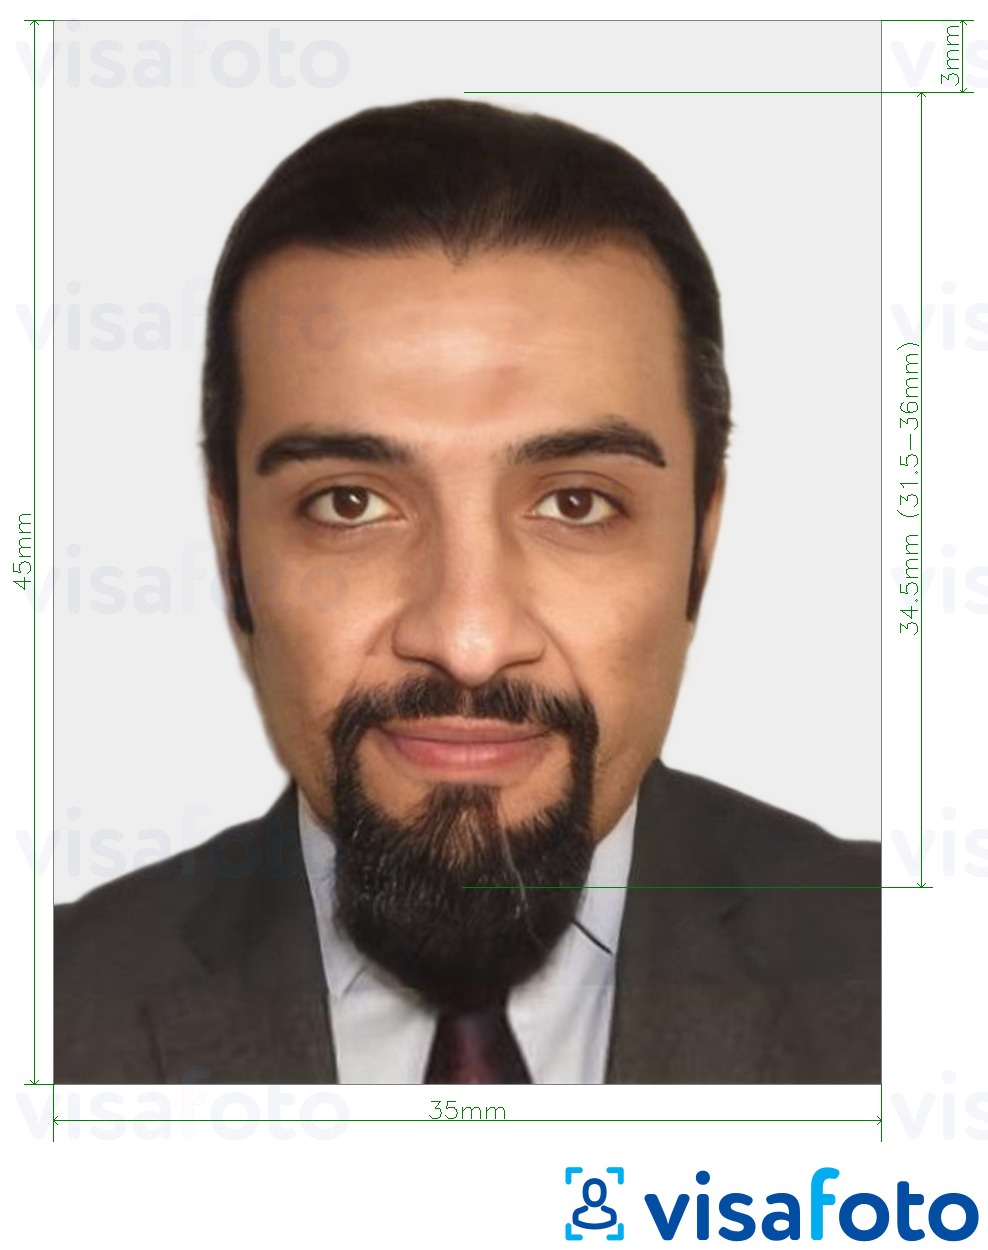 Example of photo for Mauritania ID card 35x45 mm (3.5x4.5 cm) with exact size specification